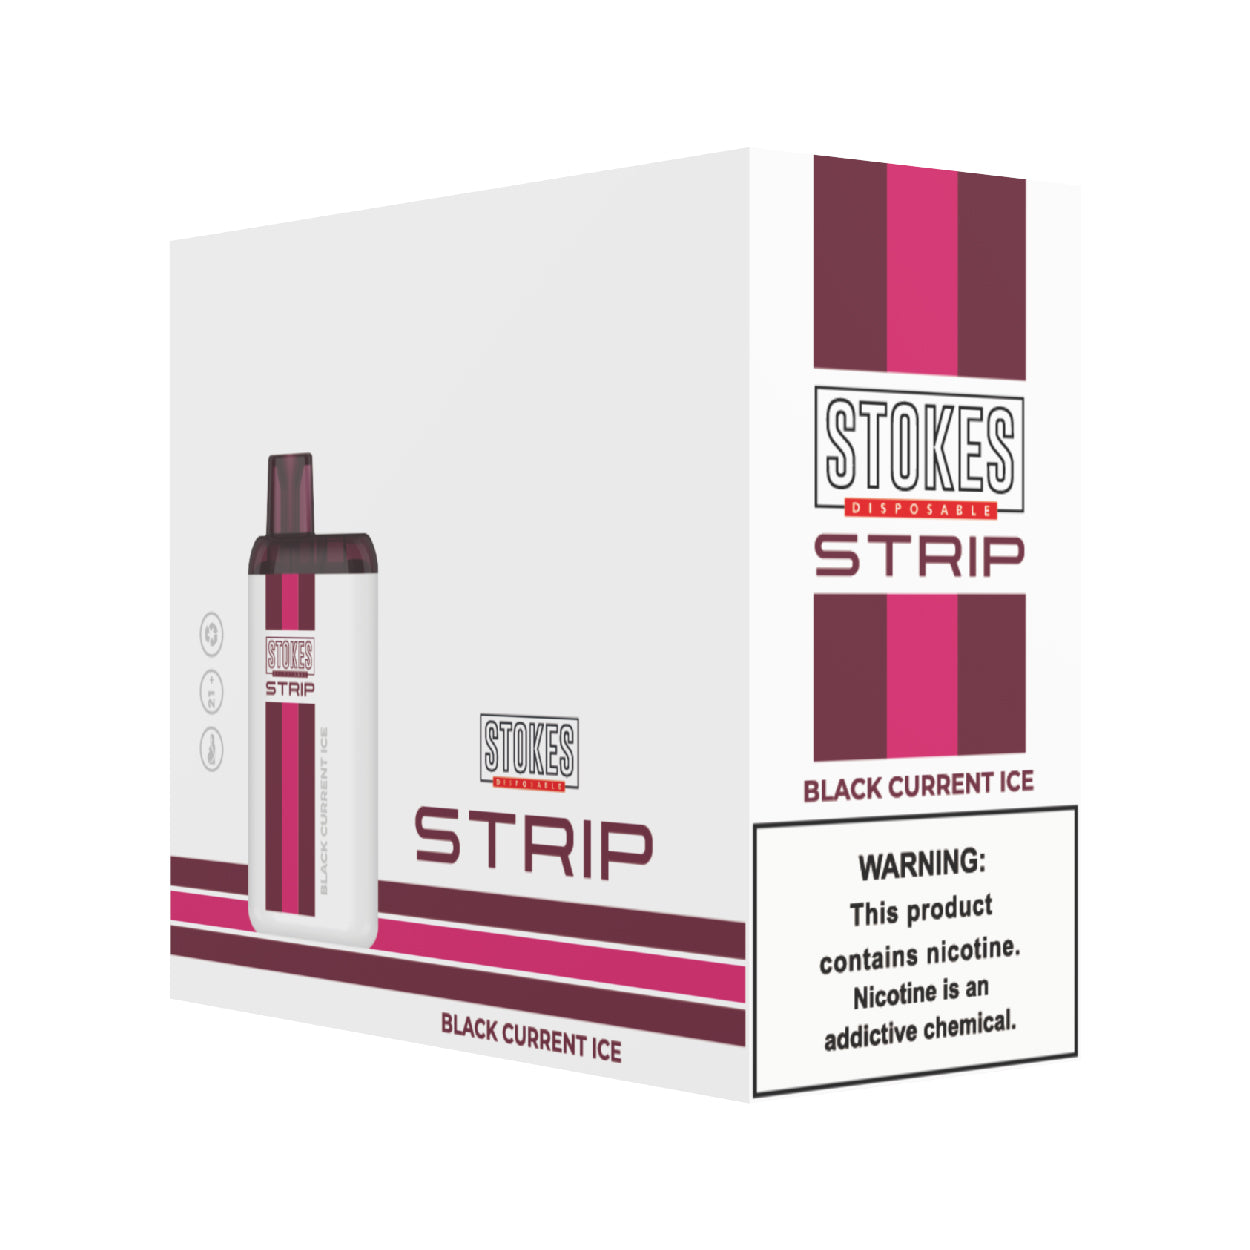 STOKES Strip - 5% Nic. (Disposable Device) - 4000 Puffs - Black Current Ice